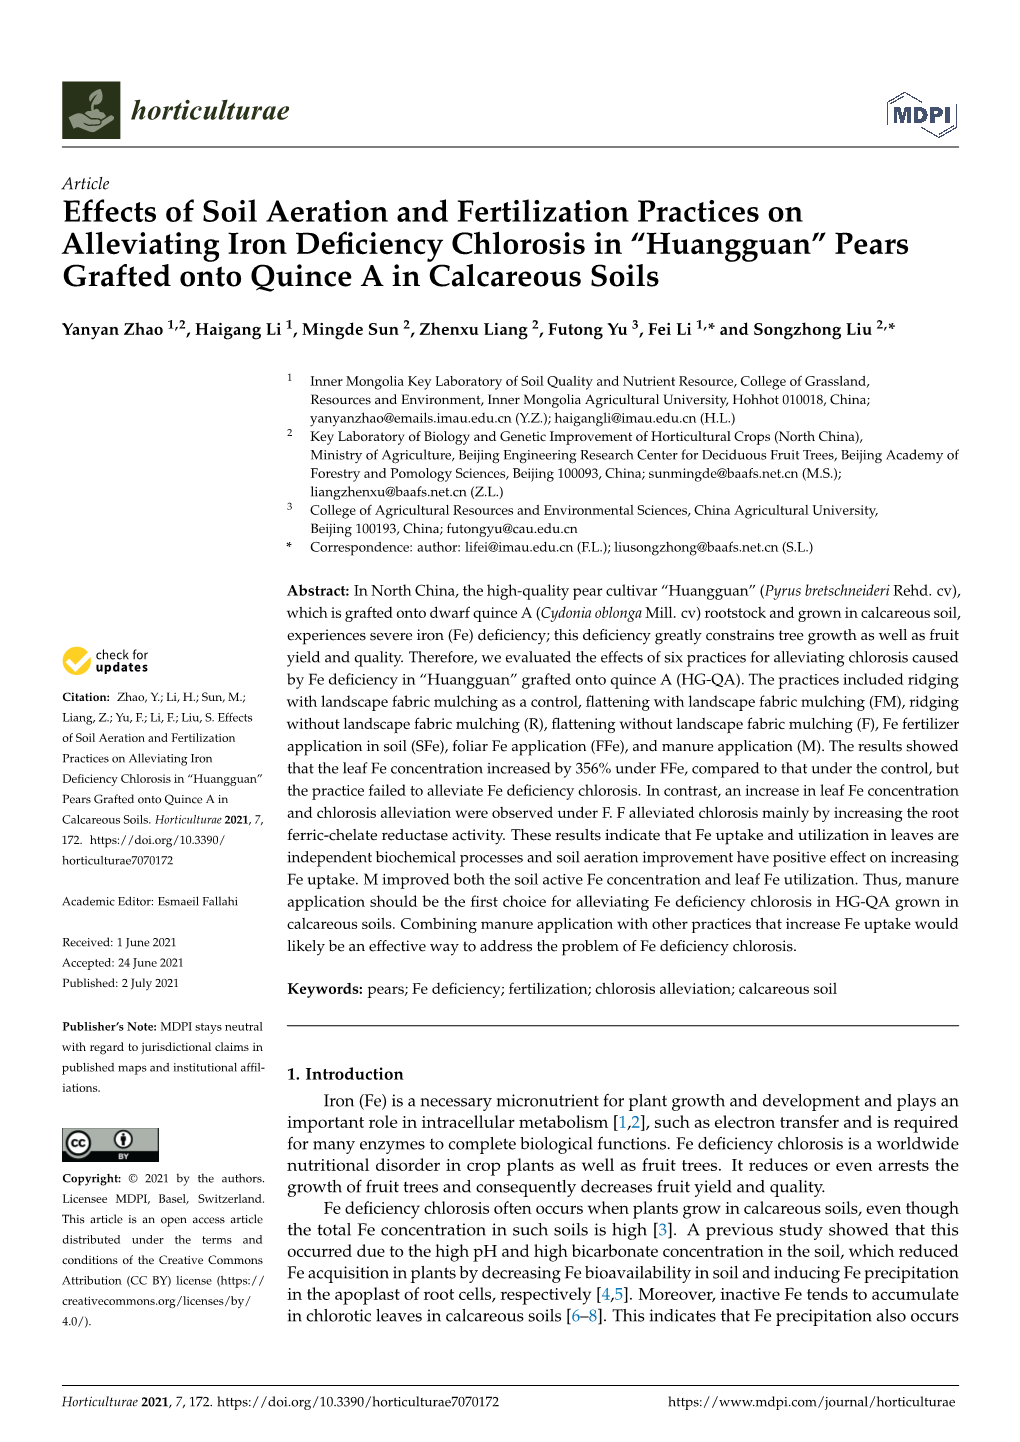 Effects of Soil Aeration and Fertilization Practices on Alleviating Iron Deﬁciency Chlorosis in “Huangguan” Pears Grafted Onto Quince a in Calcareous Soils